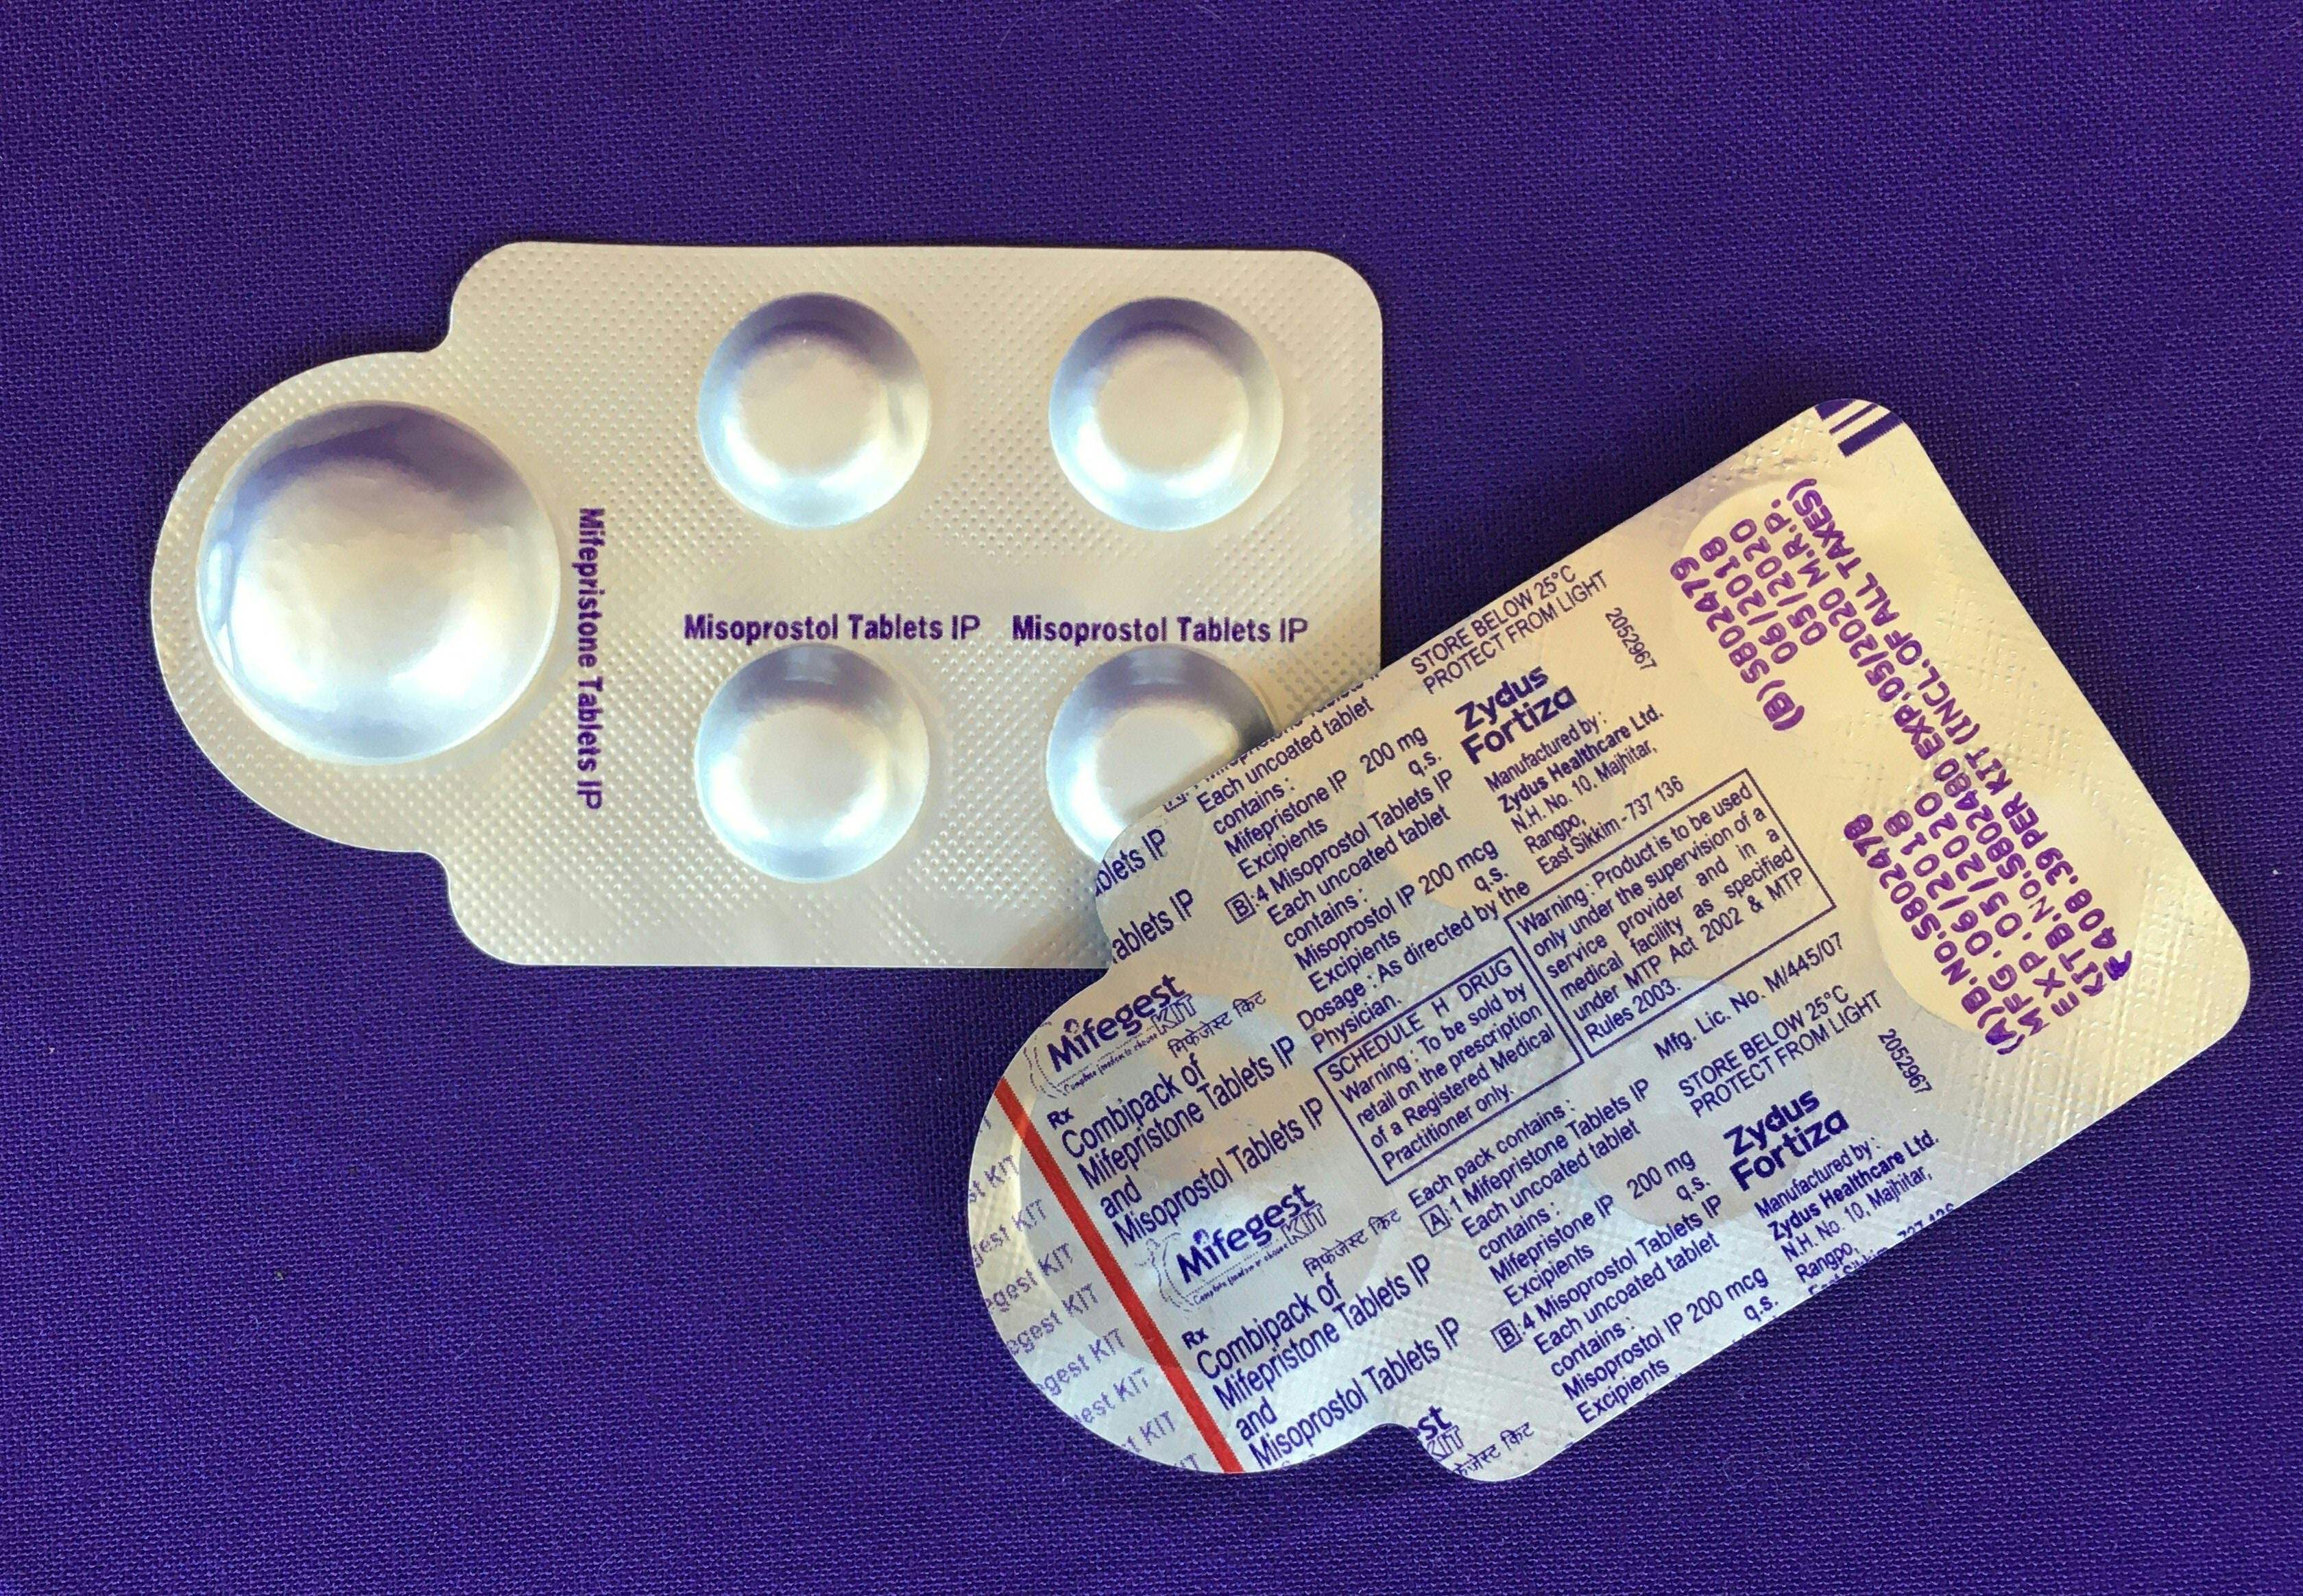 Misoprostol is one of two drugs used for medication abortions, the most common form of abortion care in the US.